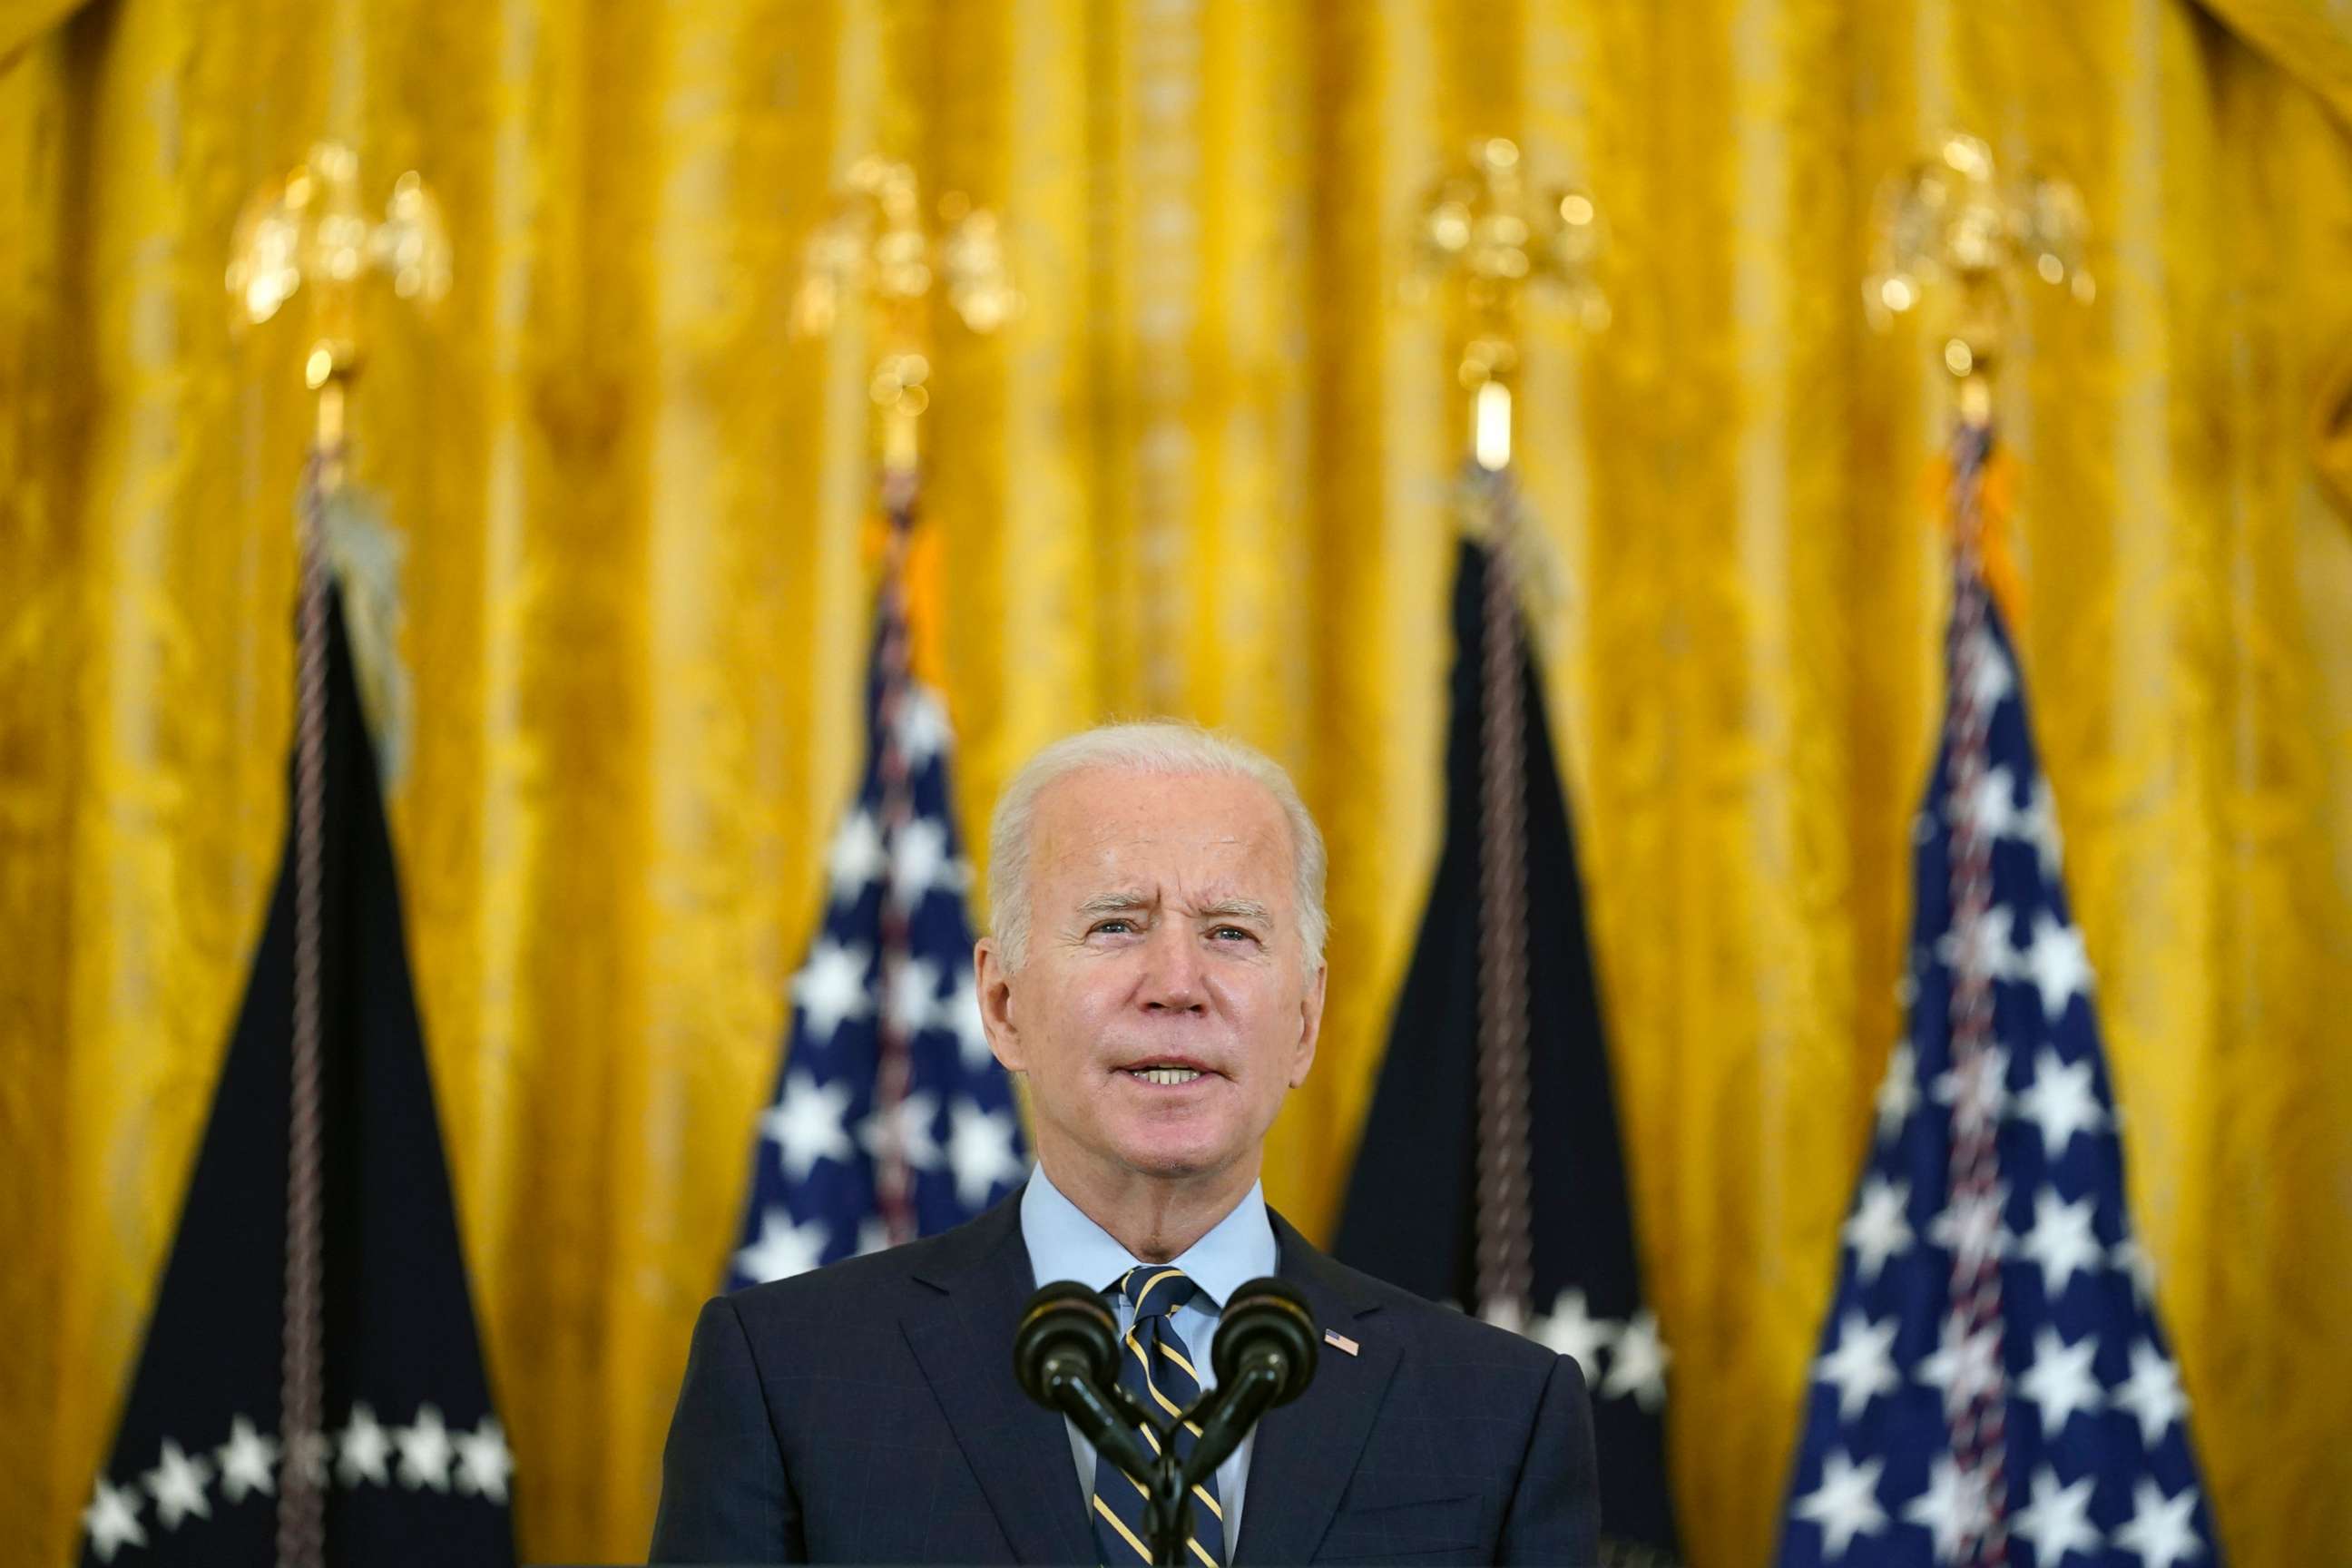 PHOTO: President Joe Biden speaks from the East Room of the White House in Washington, D.C., Dec. 6, 2021, on his administrations plans to lower the costs of prescription drugs.